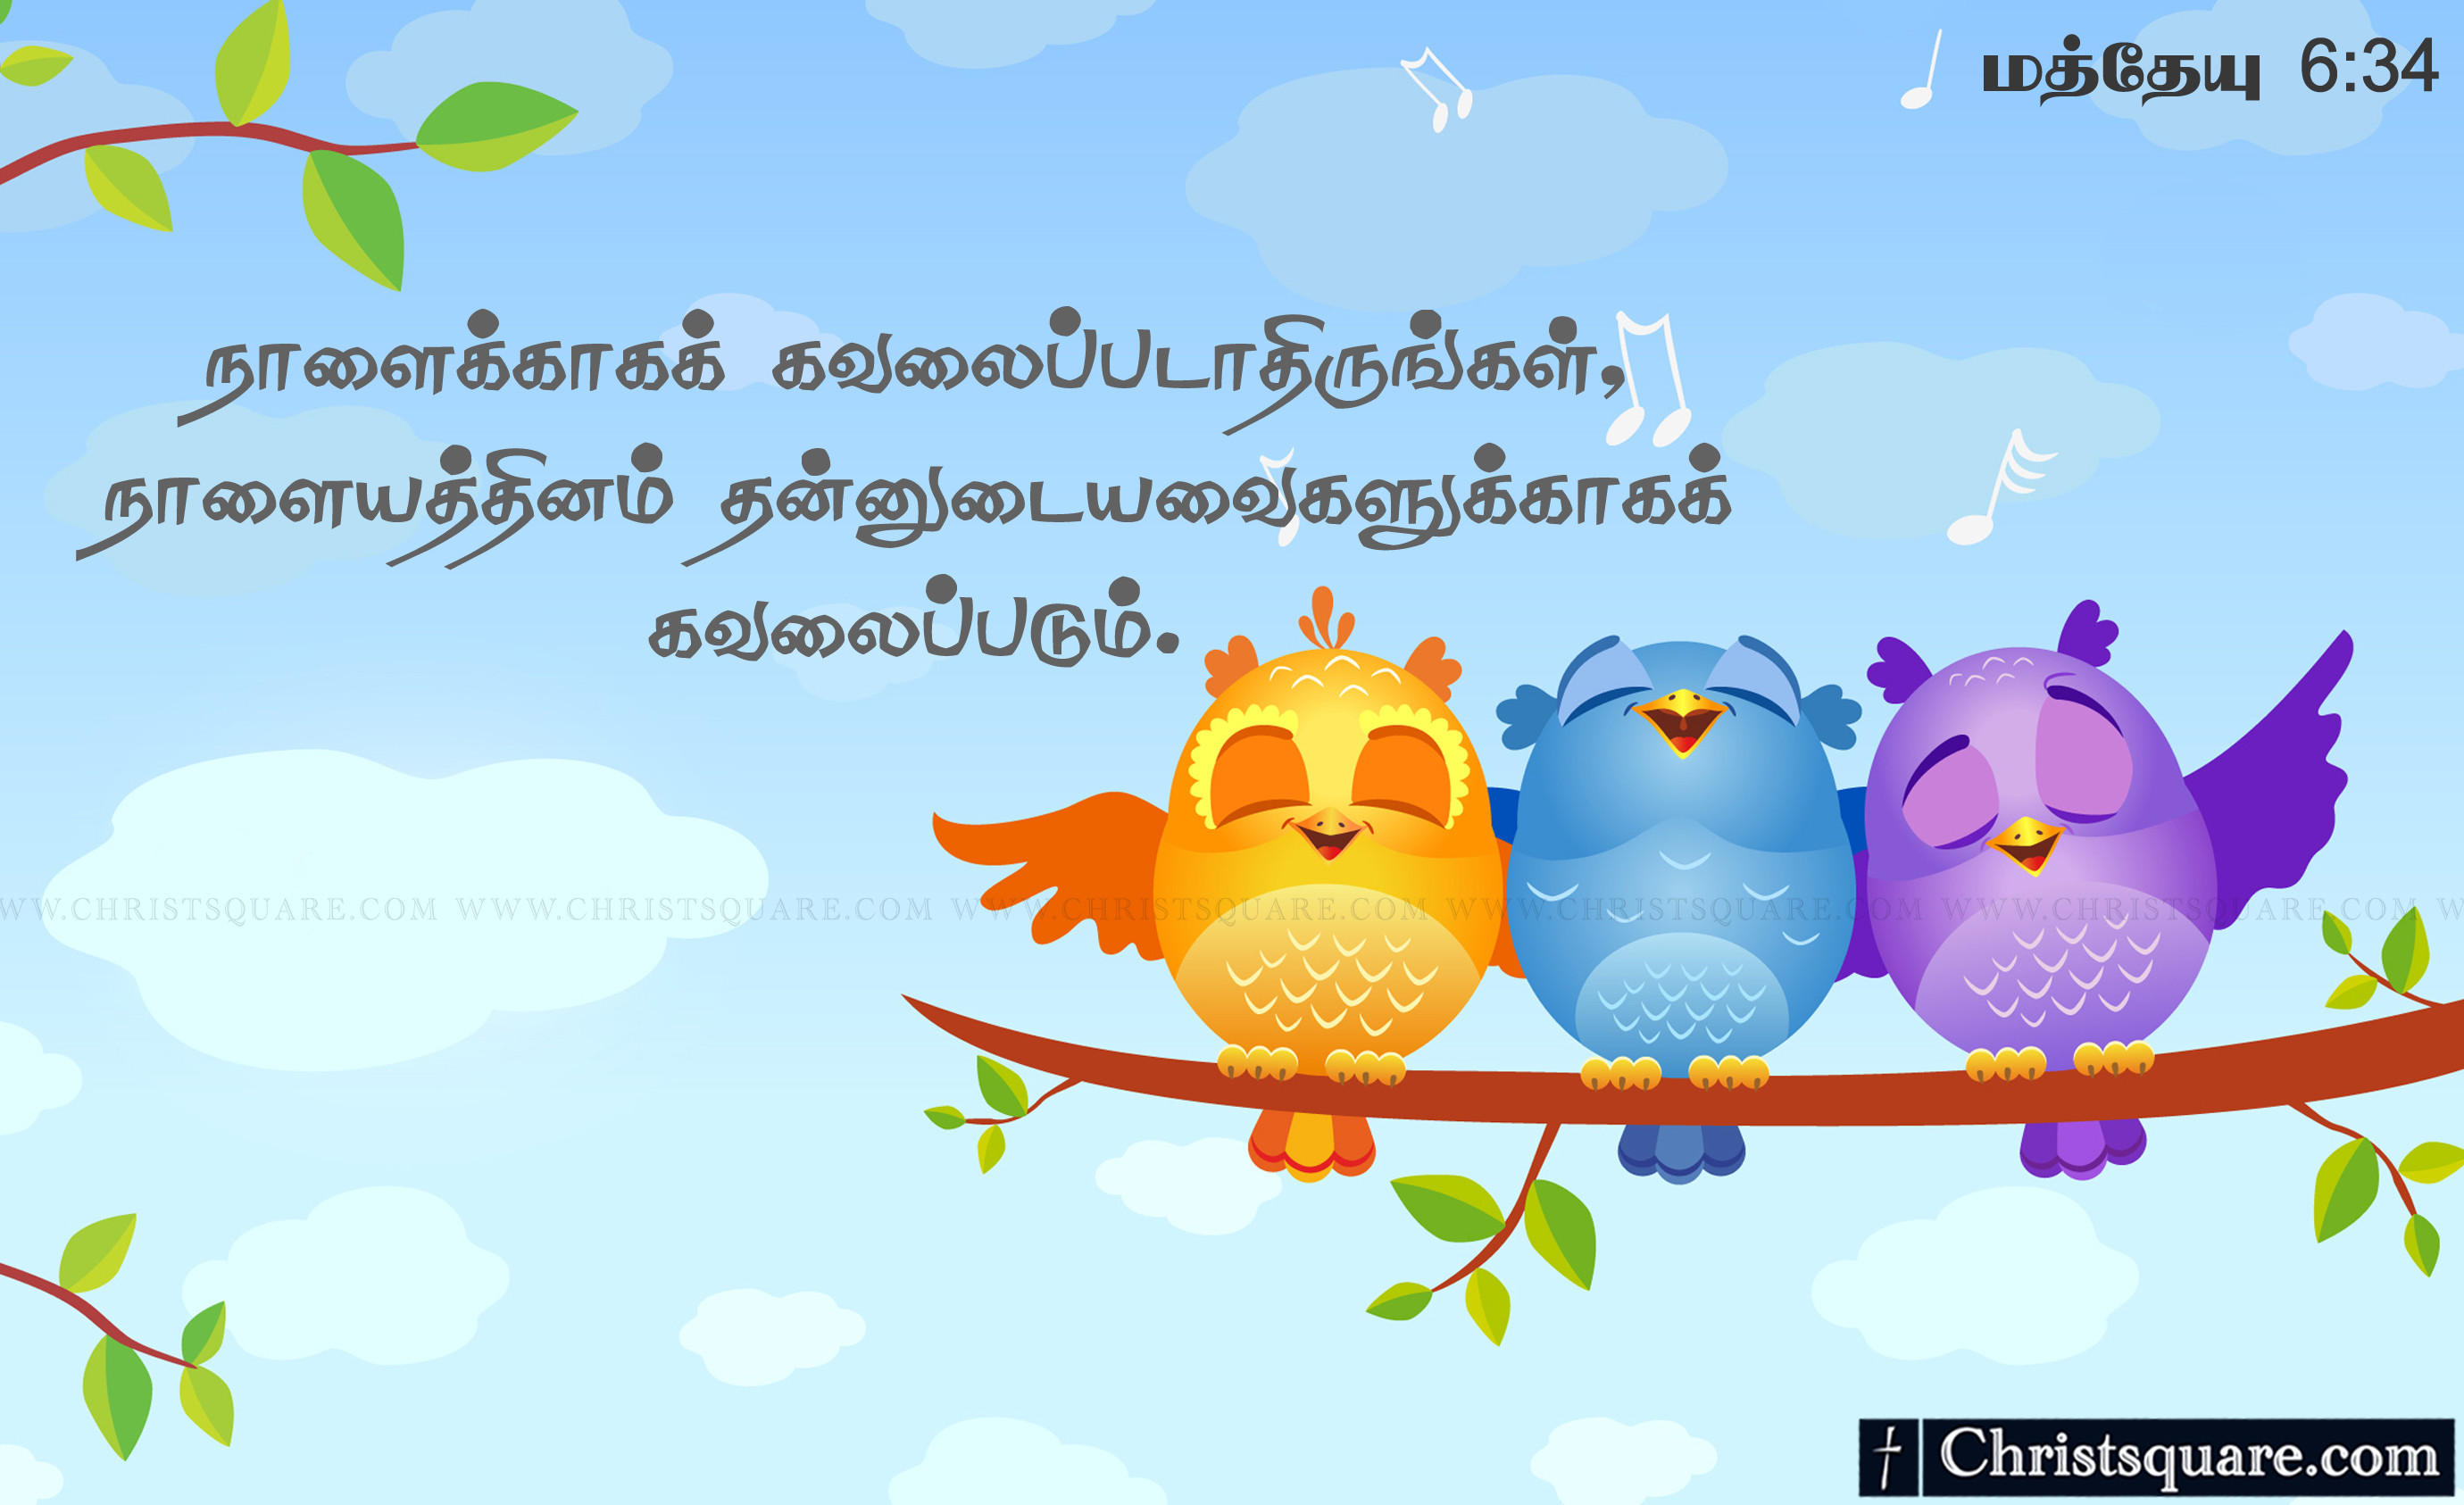 Tamil Bible Verses Clipart Hd Data Src Popular Jesus - Bible Verse For  House Warming In Tamil - 2760x1686 Wallpaper 